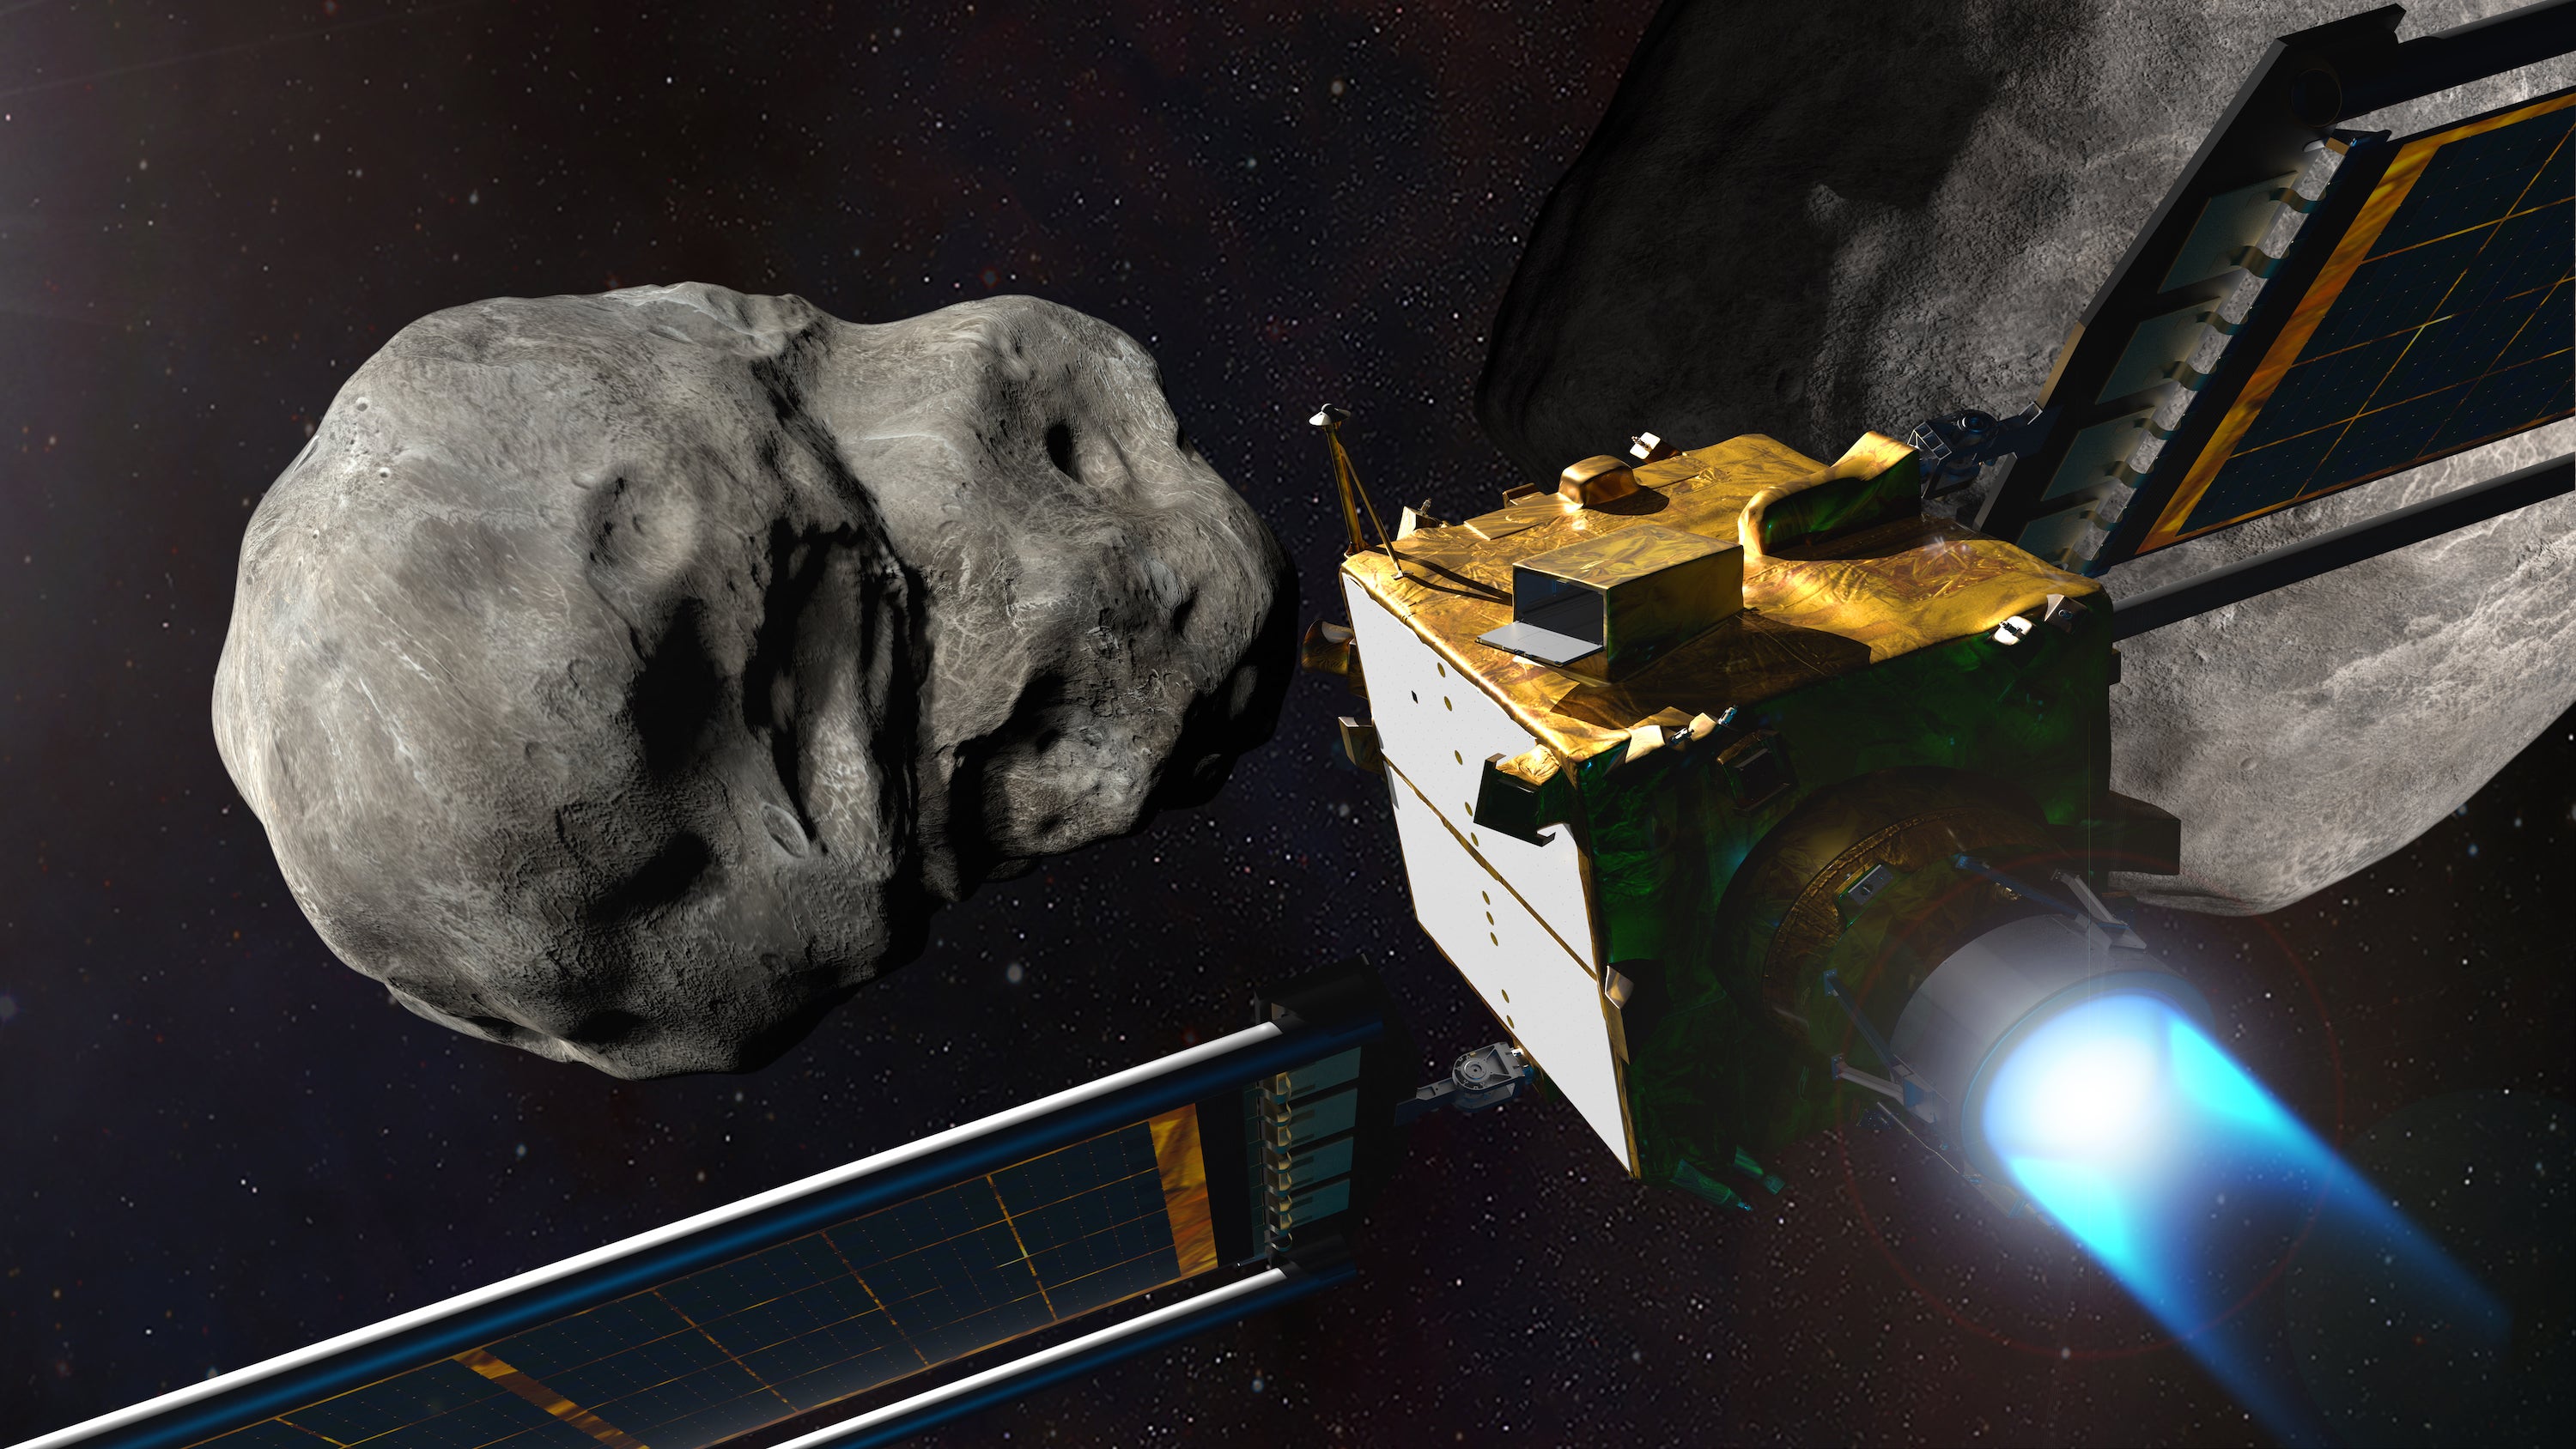 International Astronomical Union names asteroid after SOPHIE